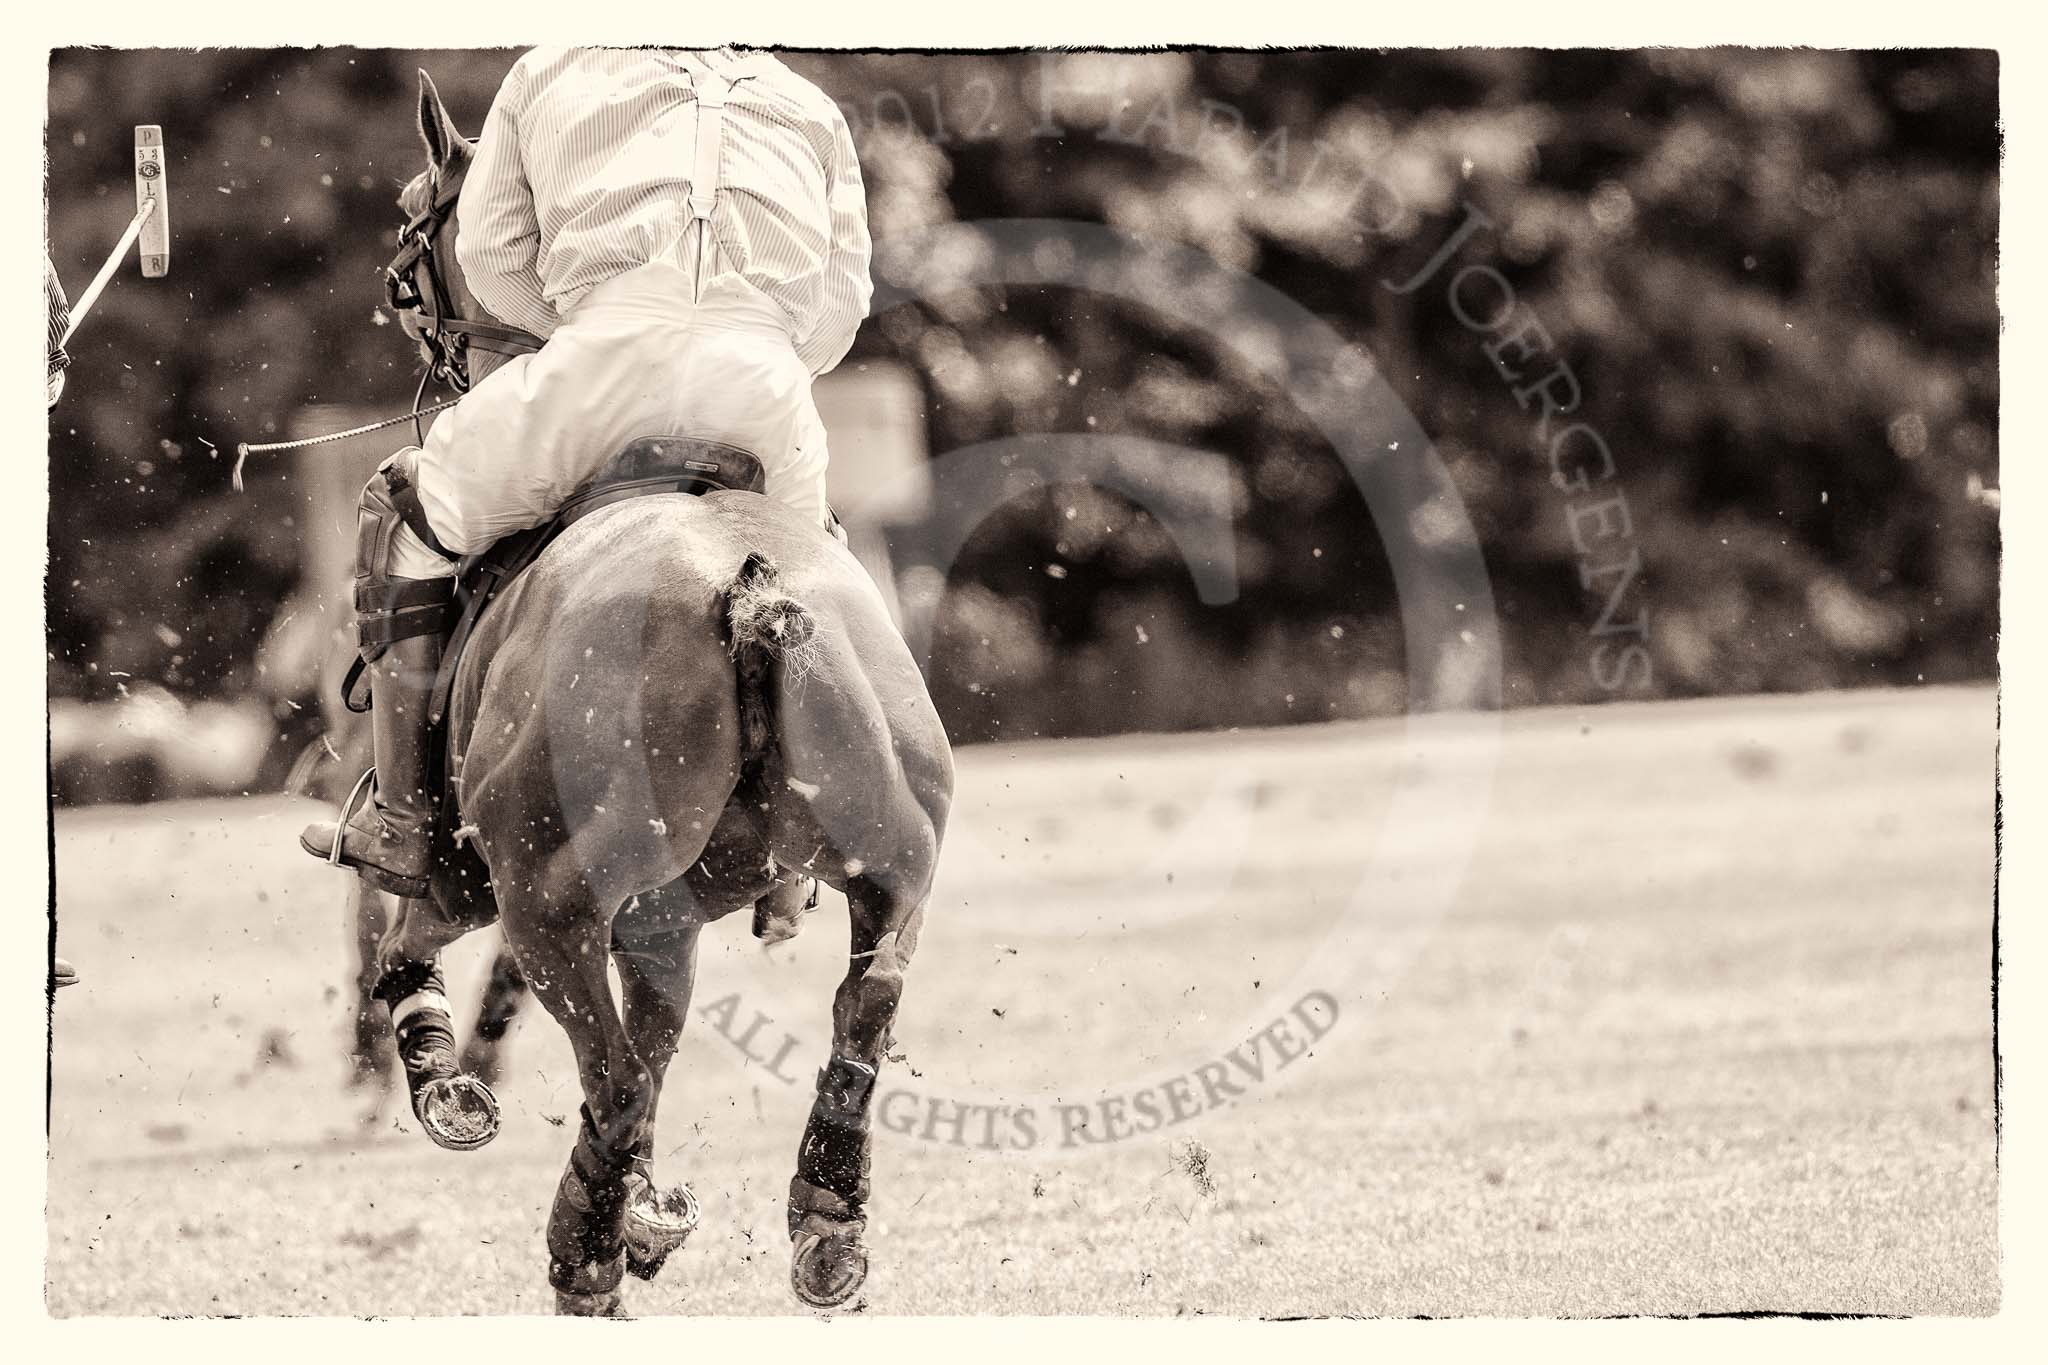 7th Heritage Polo Cup finals: Timothy Rose..
Hurtwood Park Polo Club,
Ewhurst Green,
Surrey,
United Kingdom,
on 05 August 2012 at 14:06, image #64